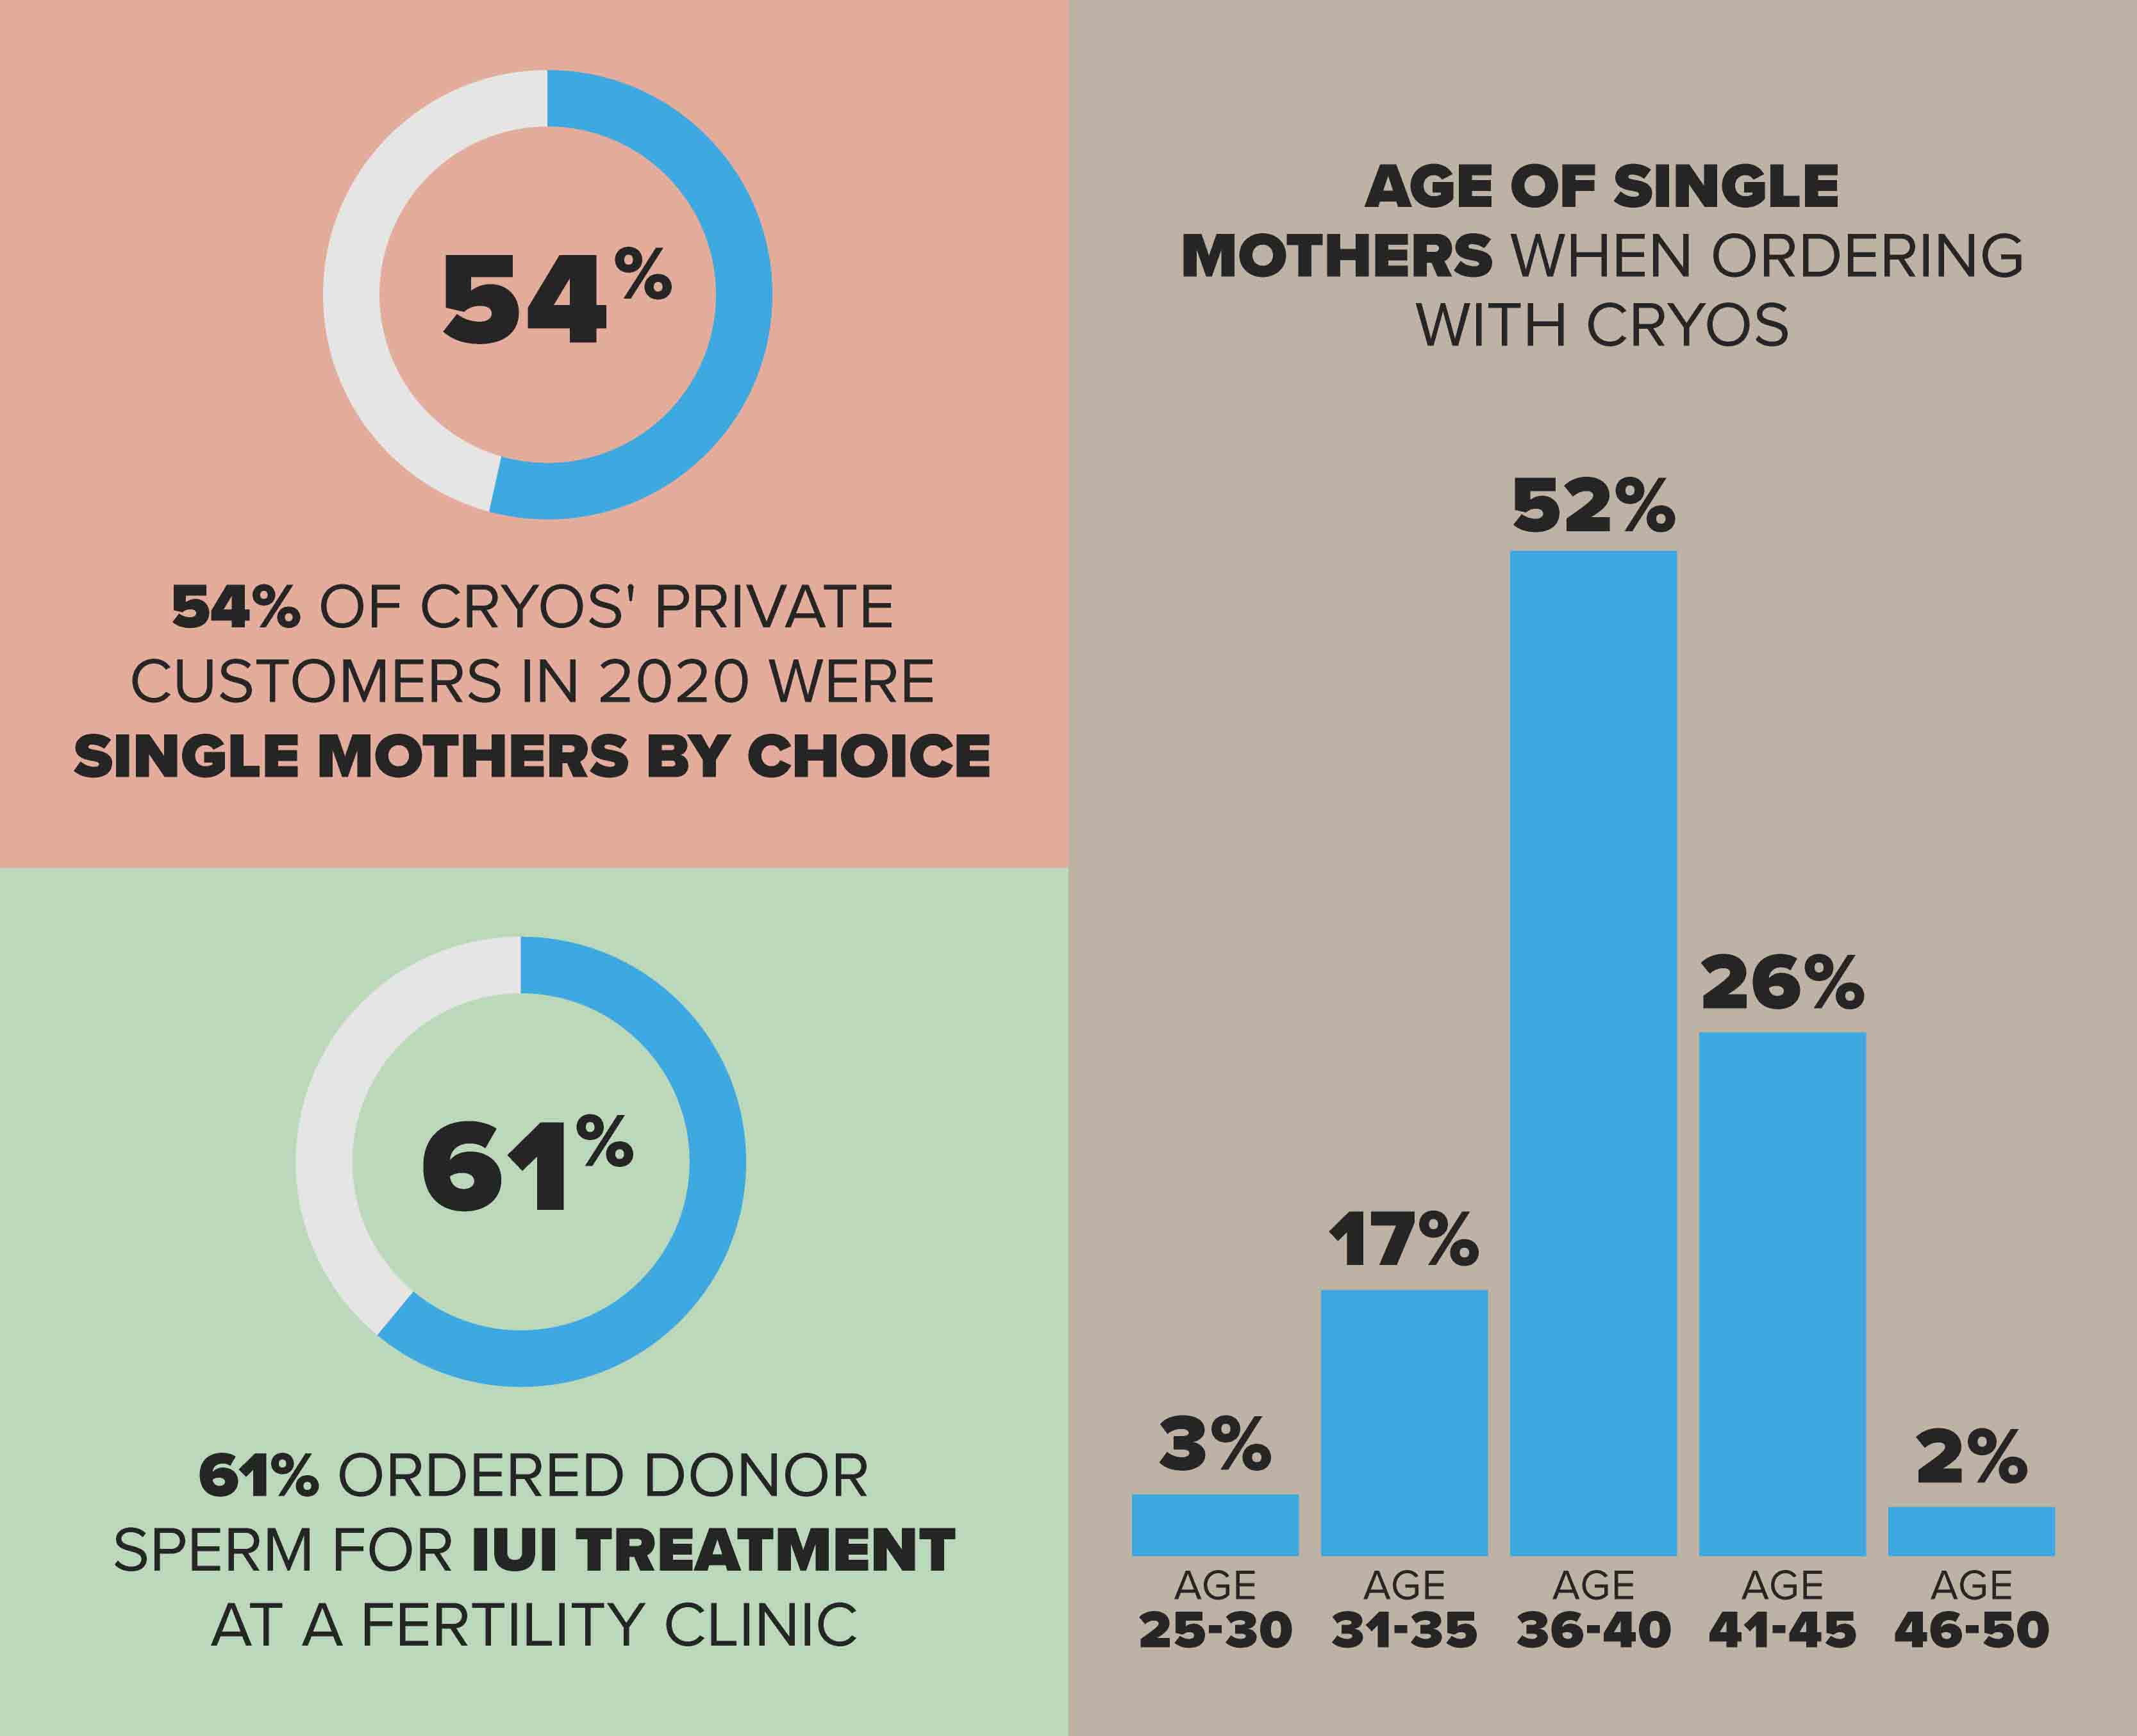 Information about single mothers by choice from Cryos' survey